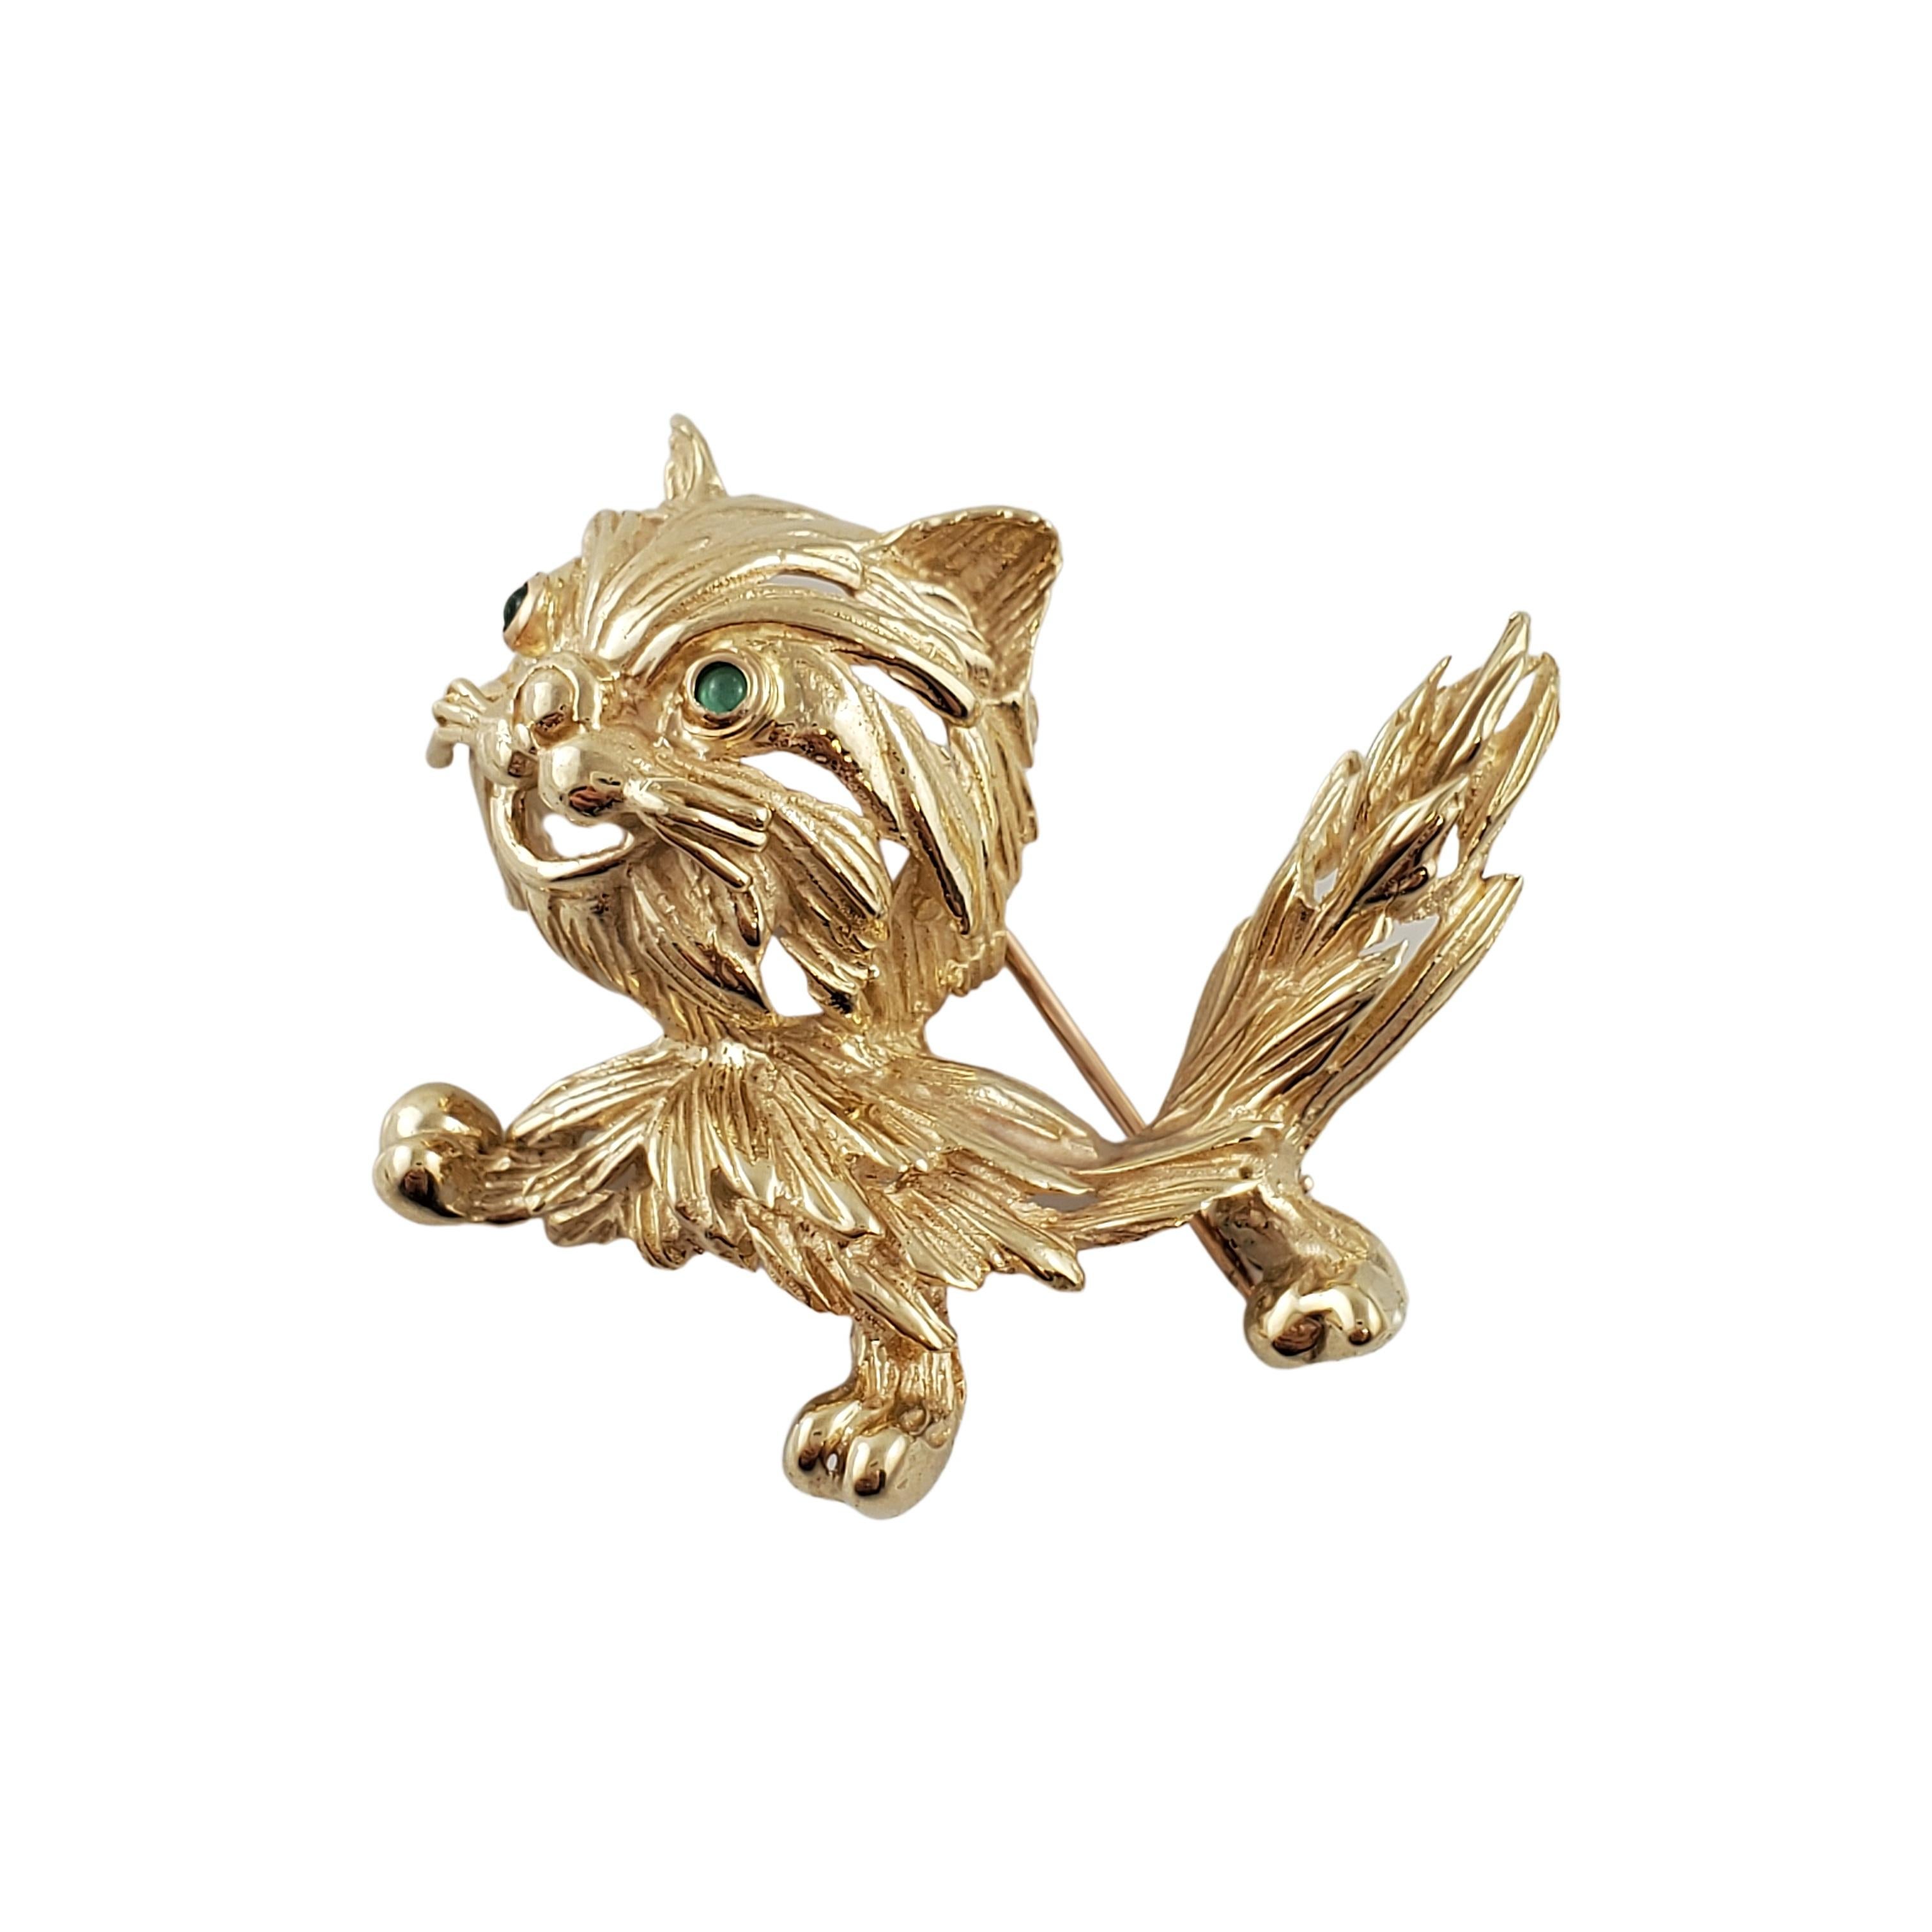 14K Yellow Gold Kitty Pin With Green Cabochon Stone

Adorable 3D kitty pin is beautifully crafted in 14k yellow gold featuring details of fur and green cabochon stone for eyes.

Size: 35mm X 35mm

Weight: 11.4 gr / 7.3 dwt

Hallmark: SORET 14K

Will